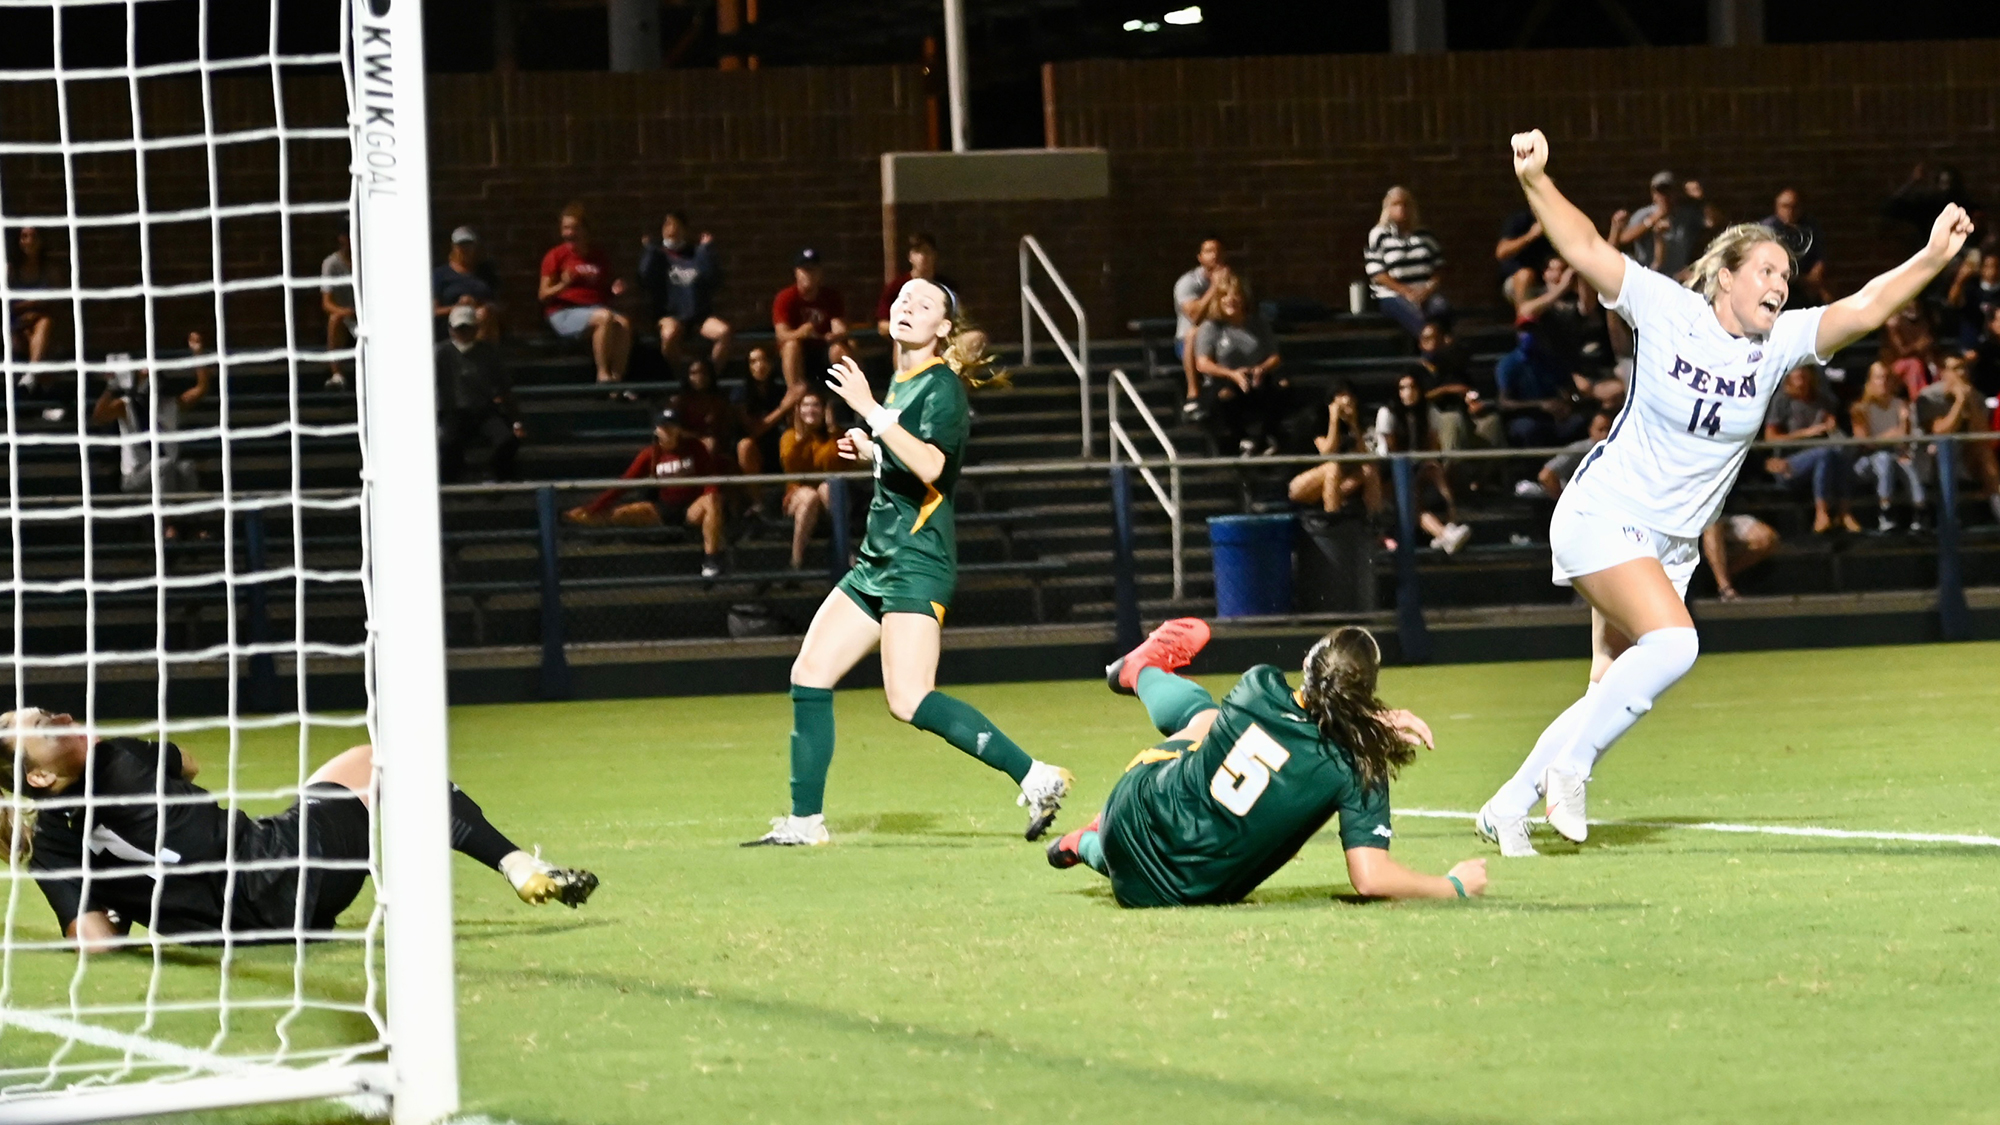 Shenk celebrates with her arms raised after scoring a goal.